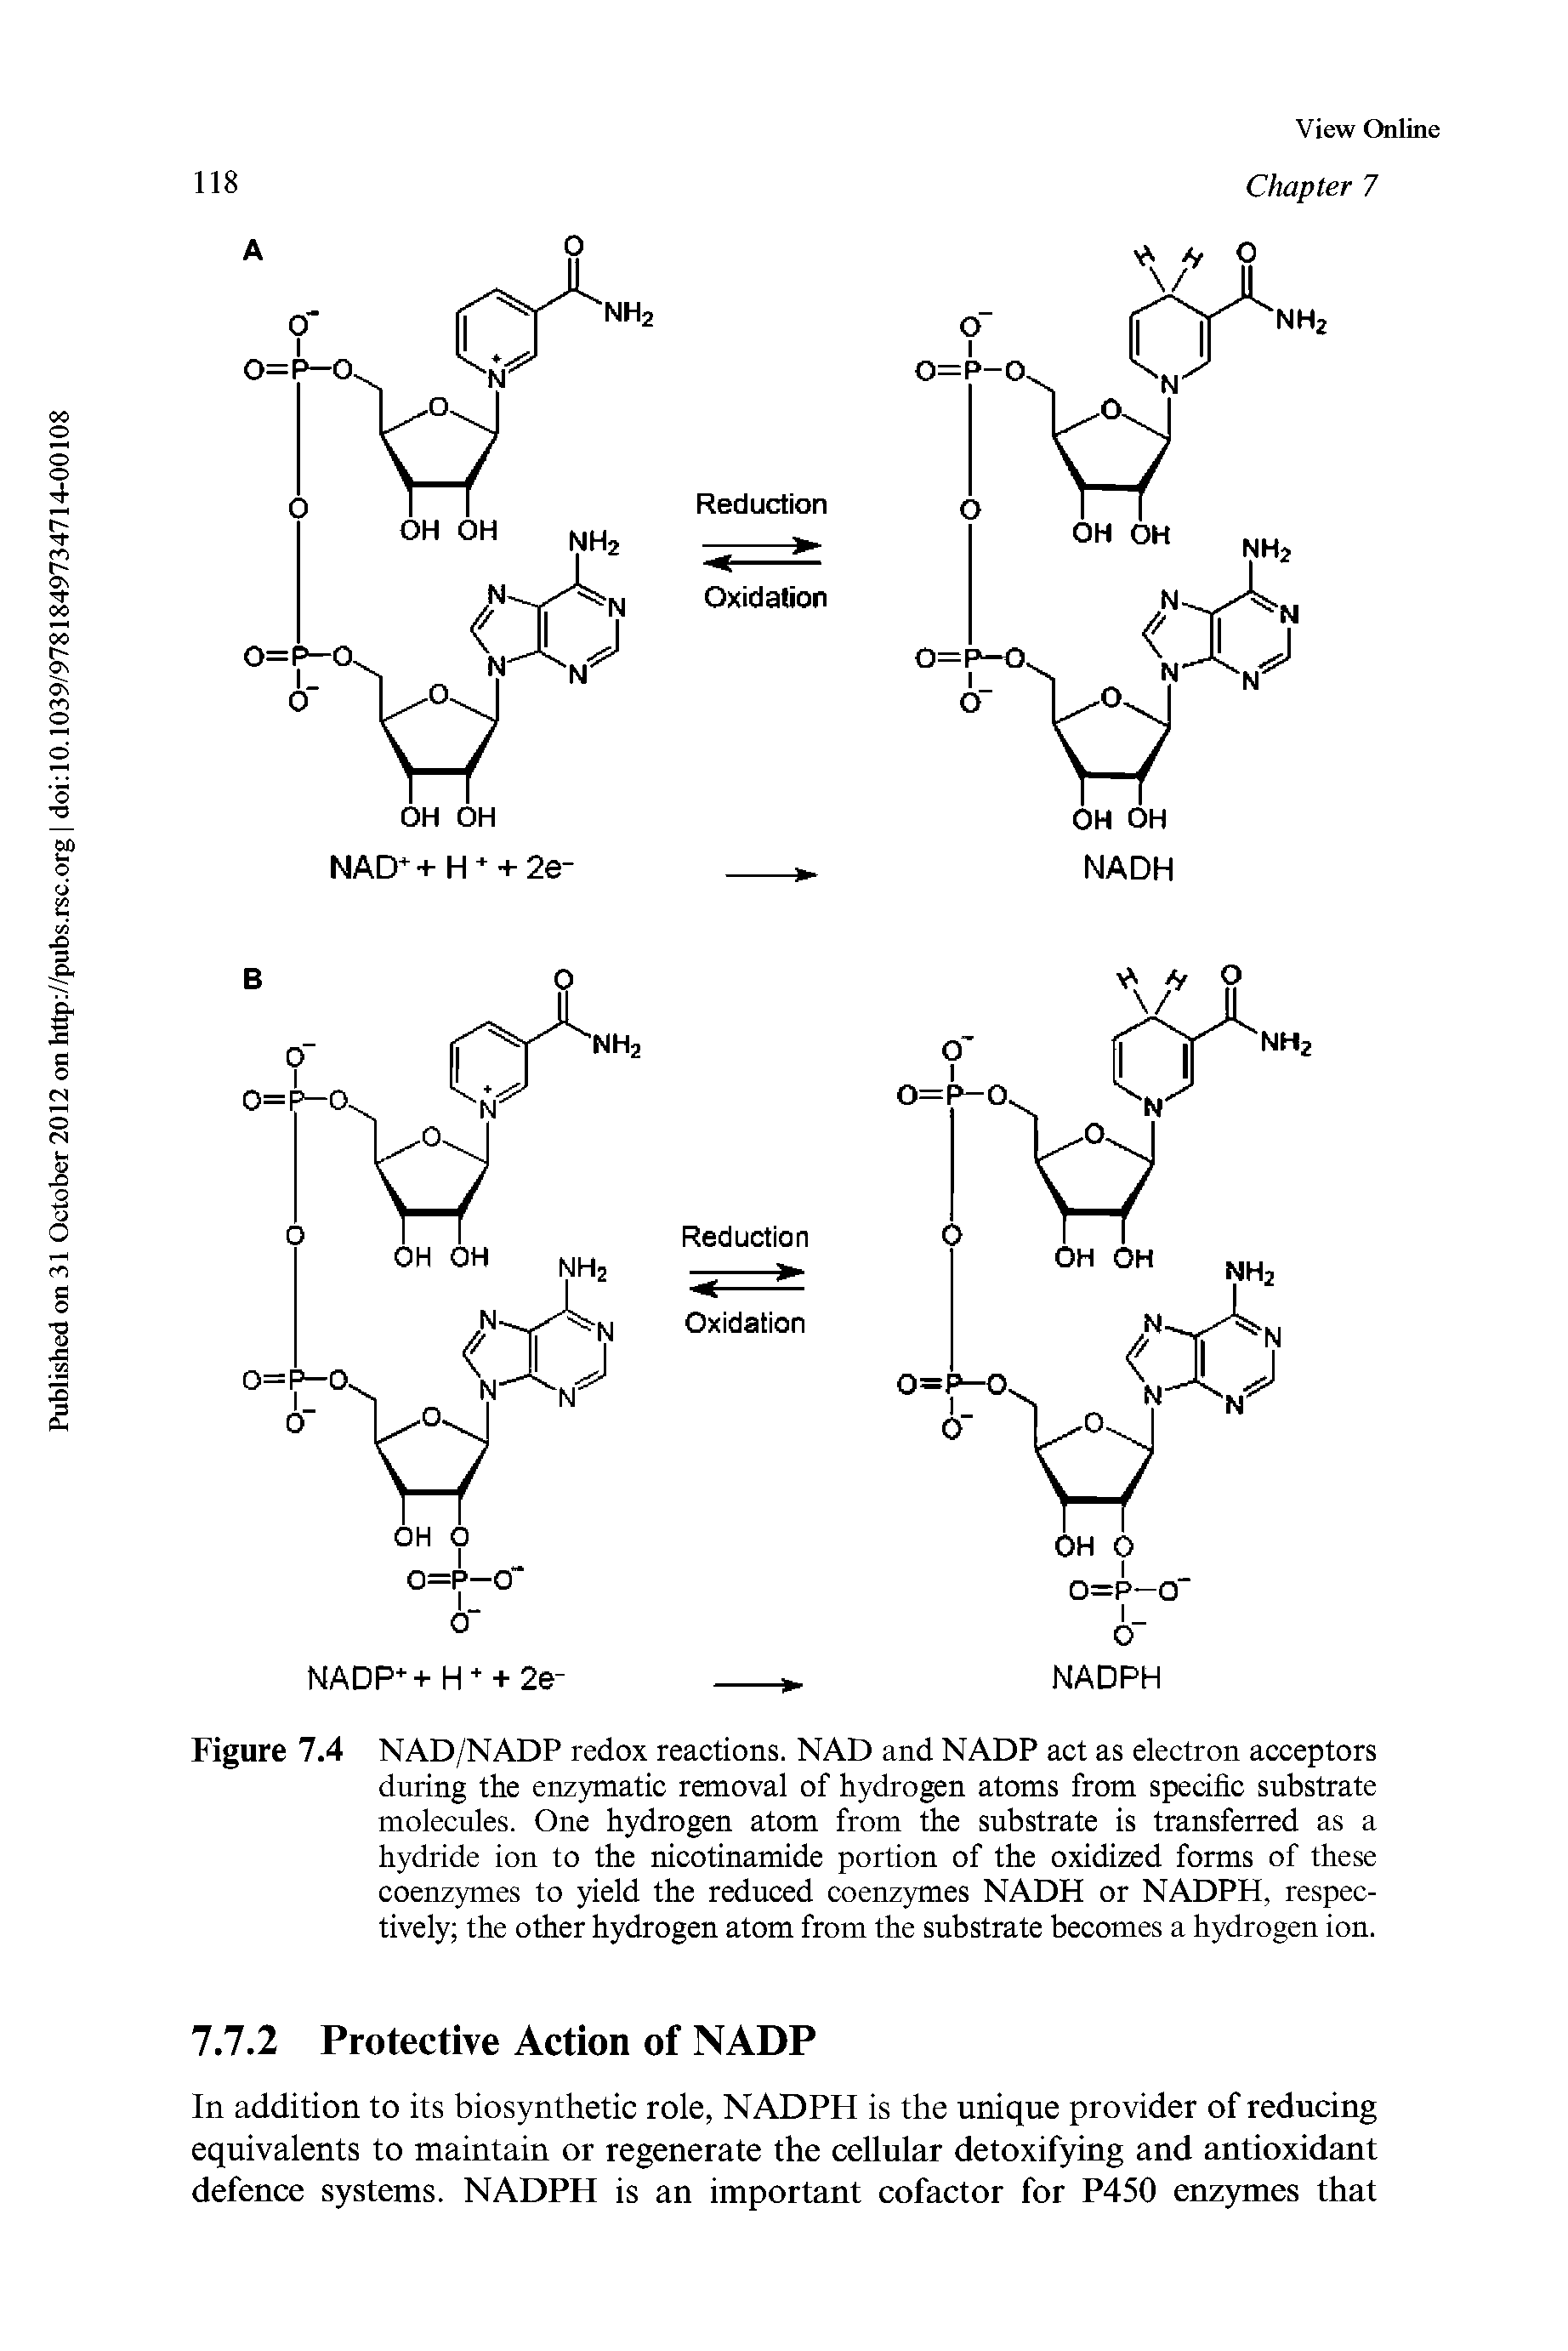 Figure 7.4 NAD/NADP redox reactions. NAD and NADP act as electron acceptors during the enzymatic removal of hydrogen atoms from specific substrate molecules. One hydrogen atom from the substrate is transferred as a hydride ion to the nicotinamide portion of the oxidized forms of these coenzymes to yield the reduced coenzymes NADH or NADPH, respectively the other hydrogen atom from the substrate becomes a hydrogen ion.